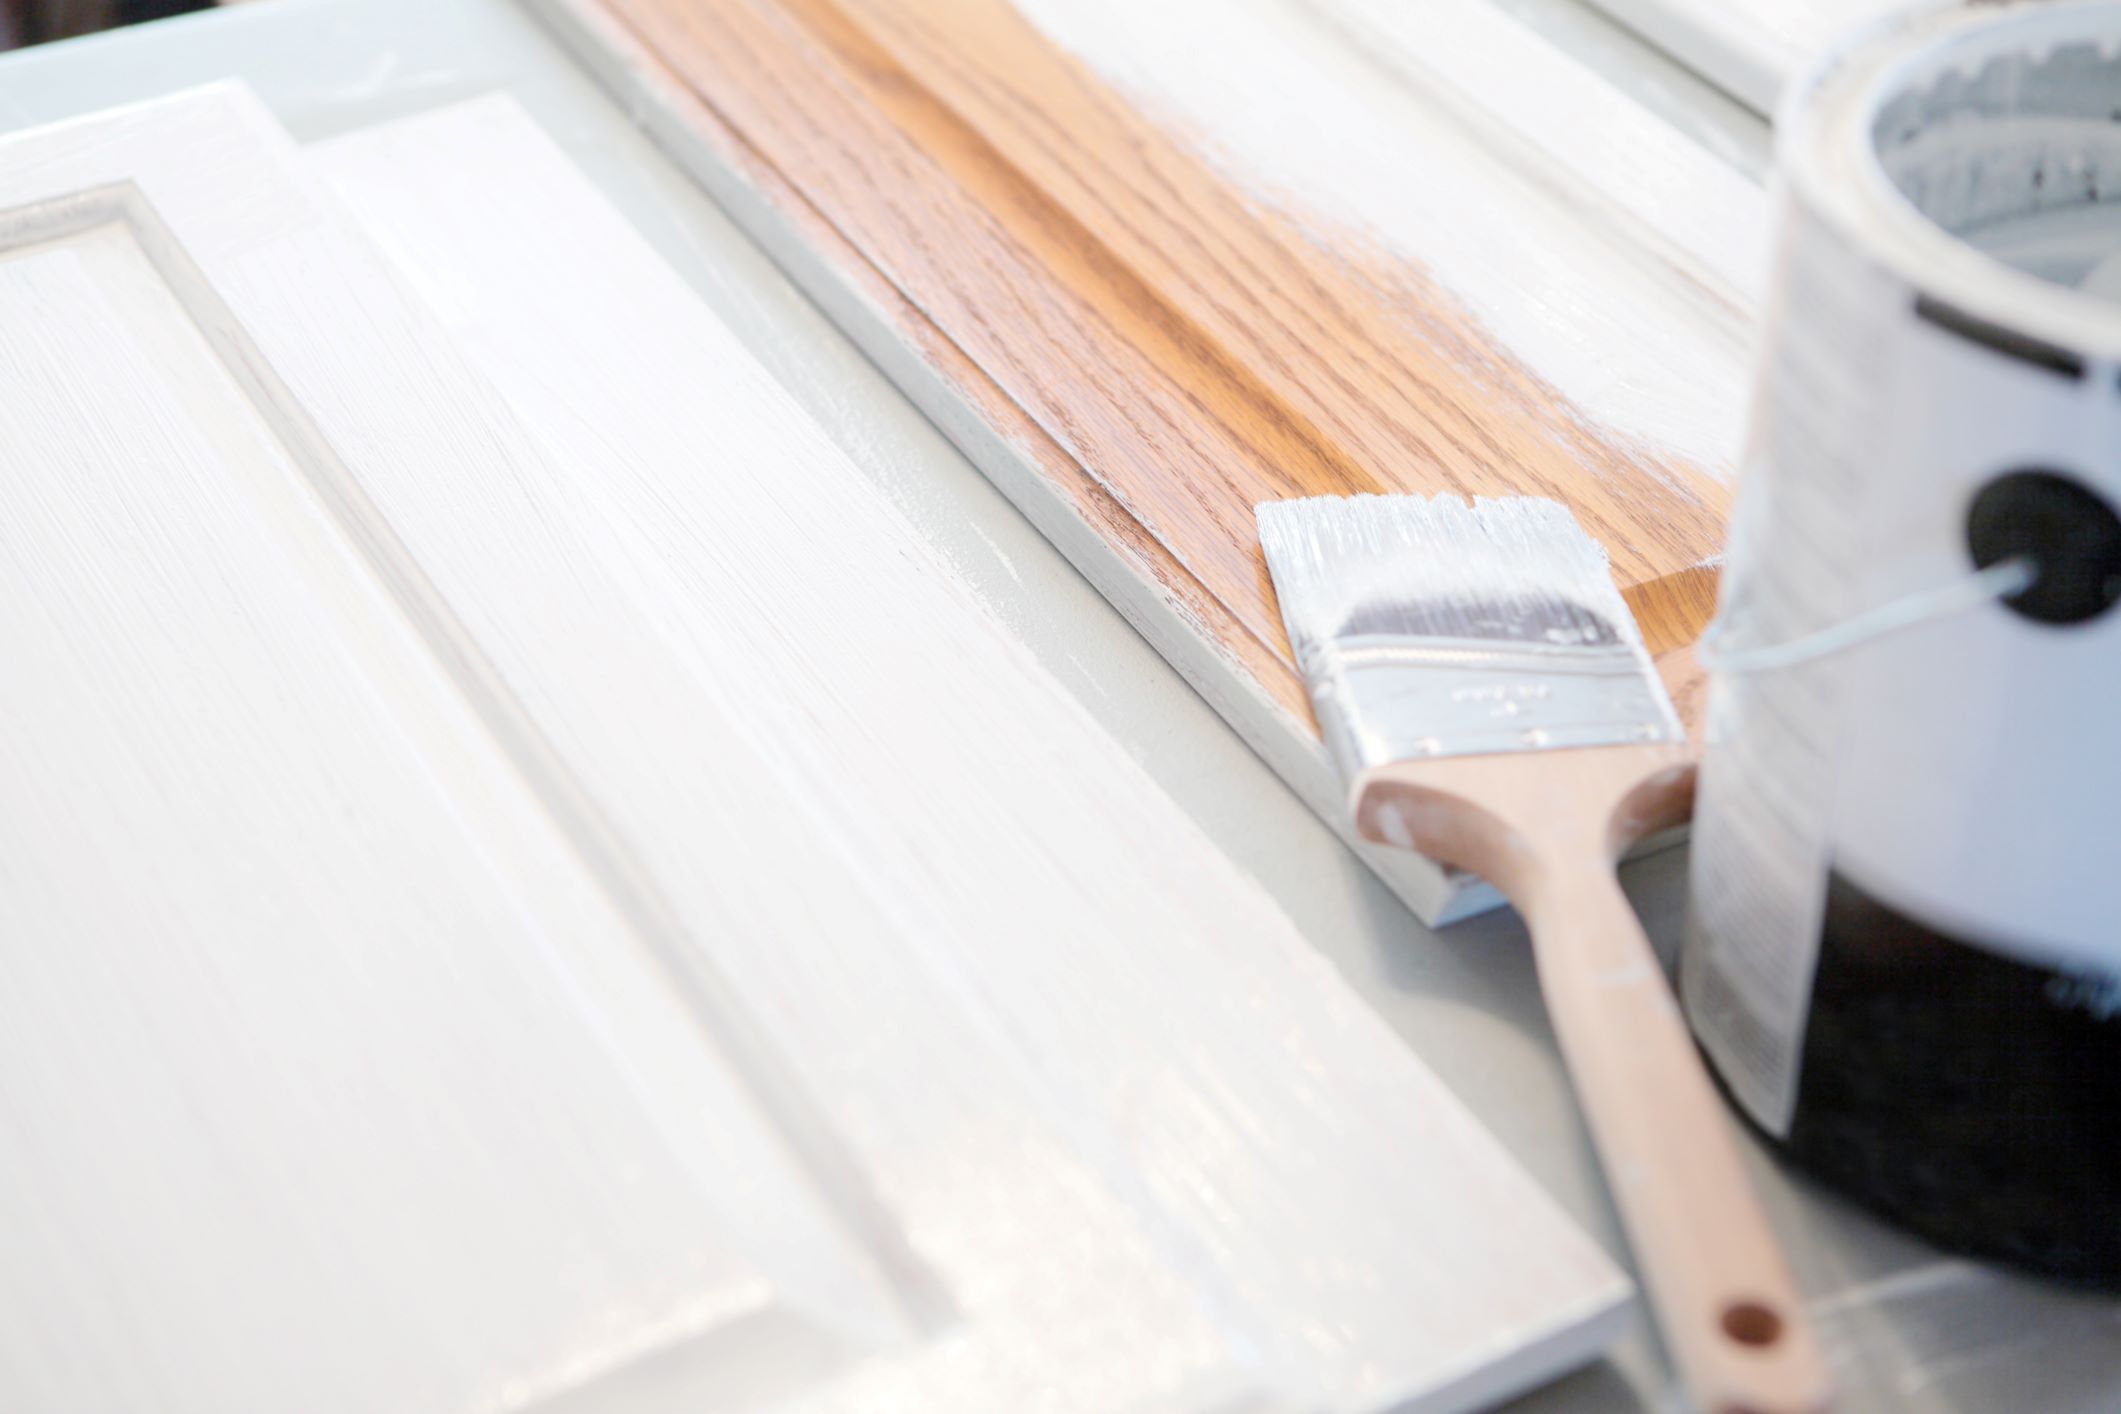 How To Paint Cabinets Without Brush Marks